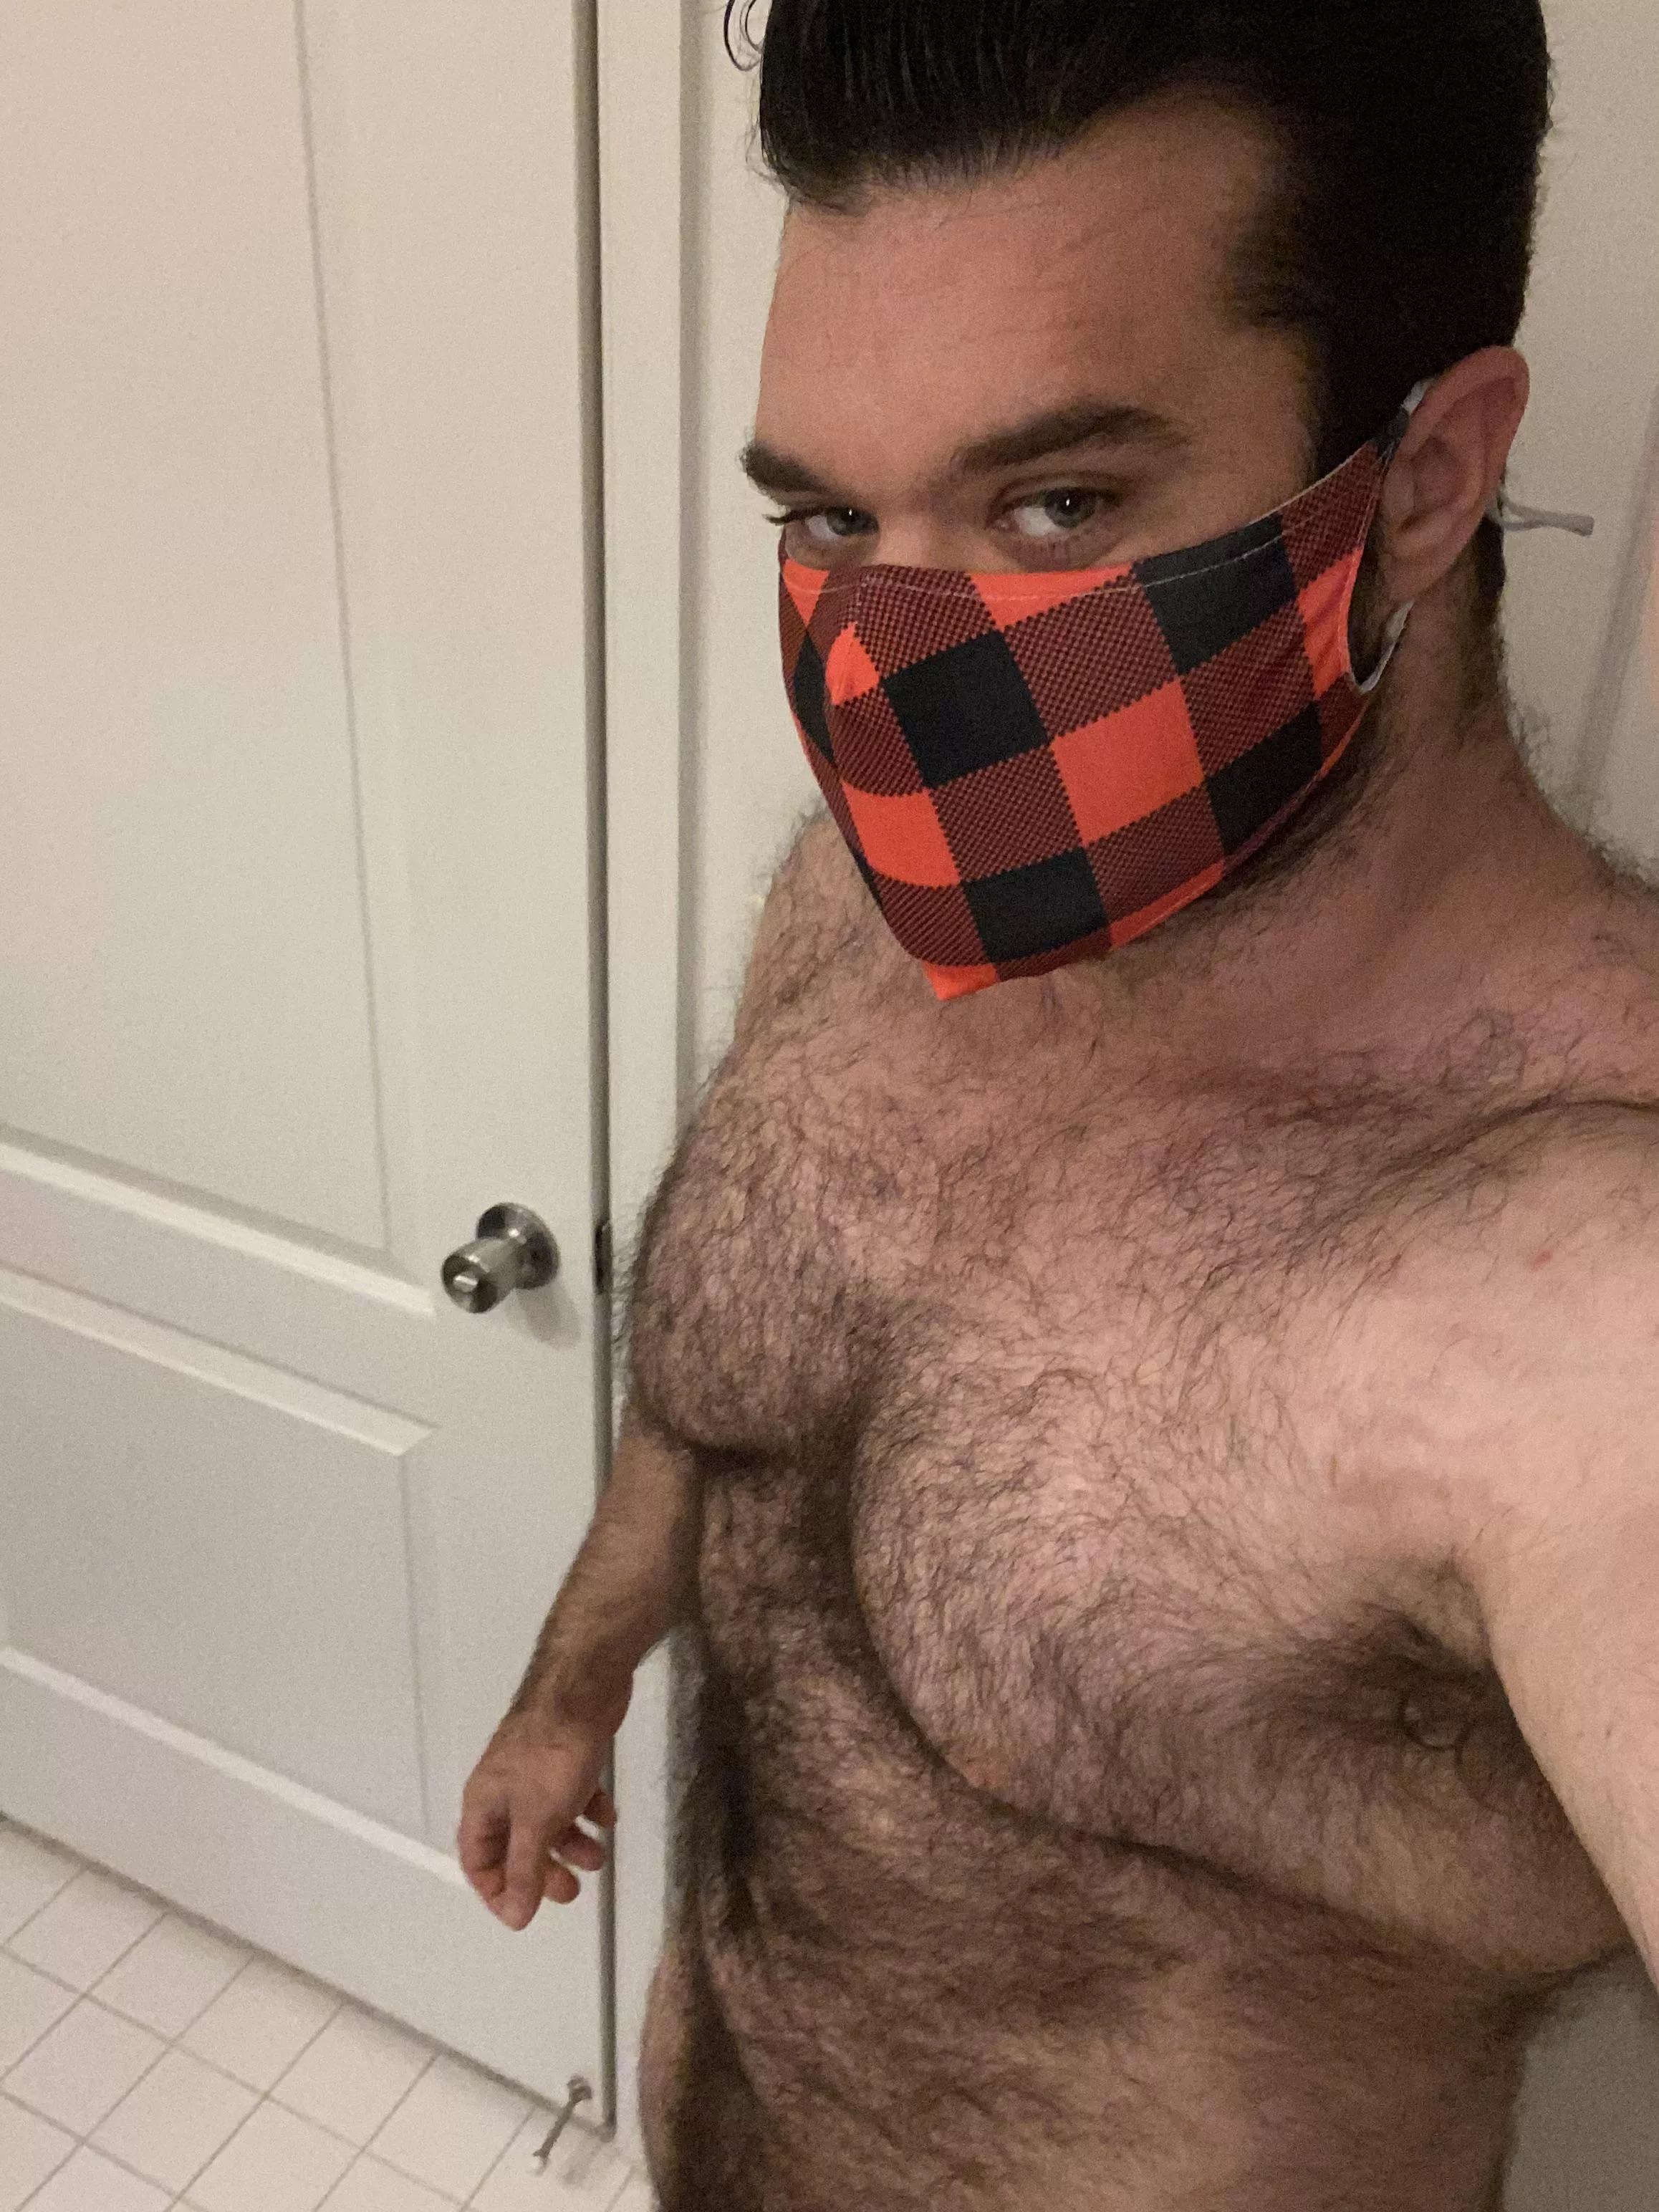 Vintage Hairy Nude Lumberjack - Just a hairy lumberjack getting ready to start the day nudes |  GLAMOURHOUND.COM